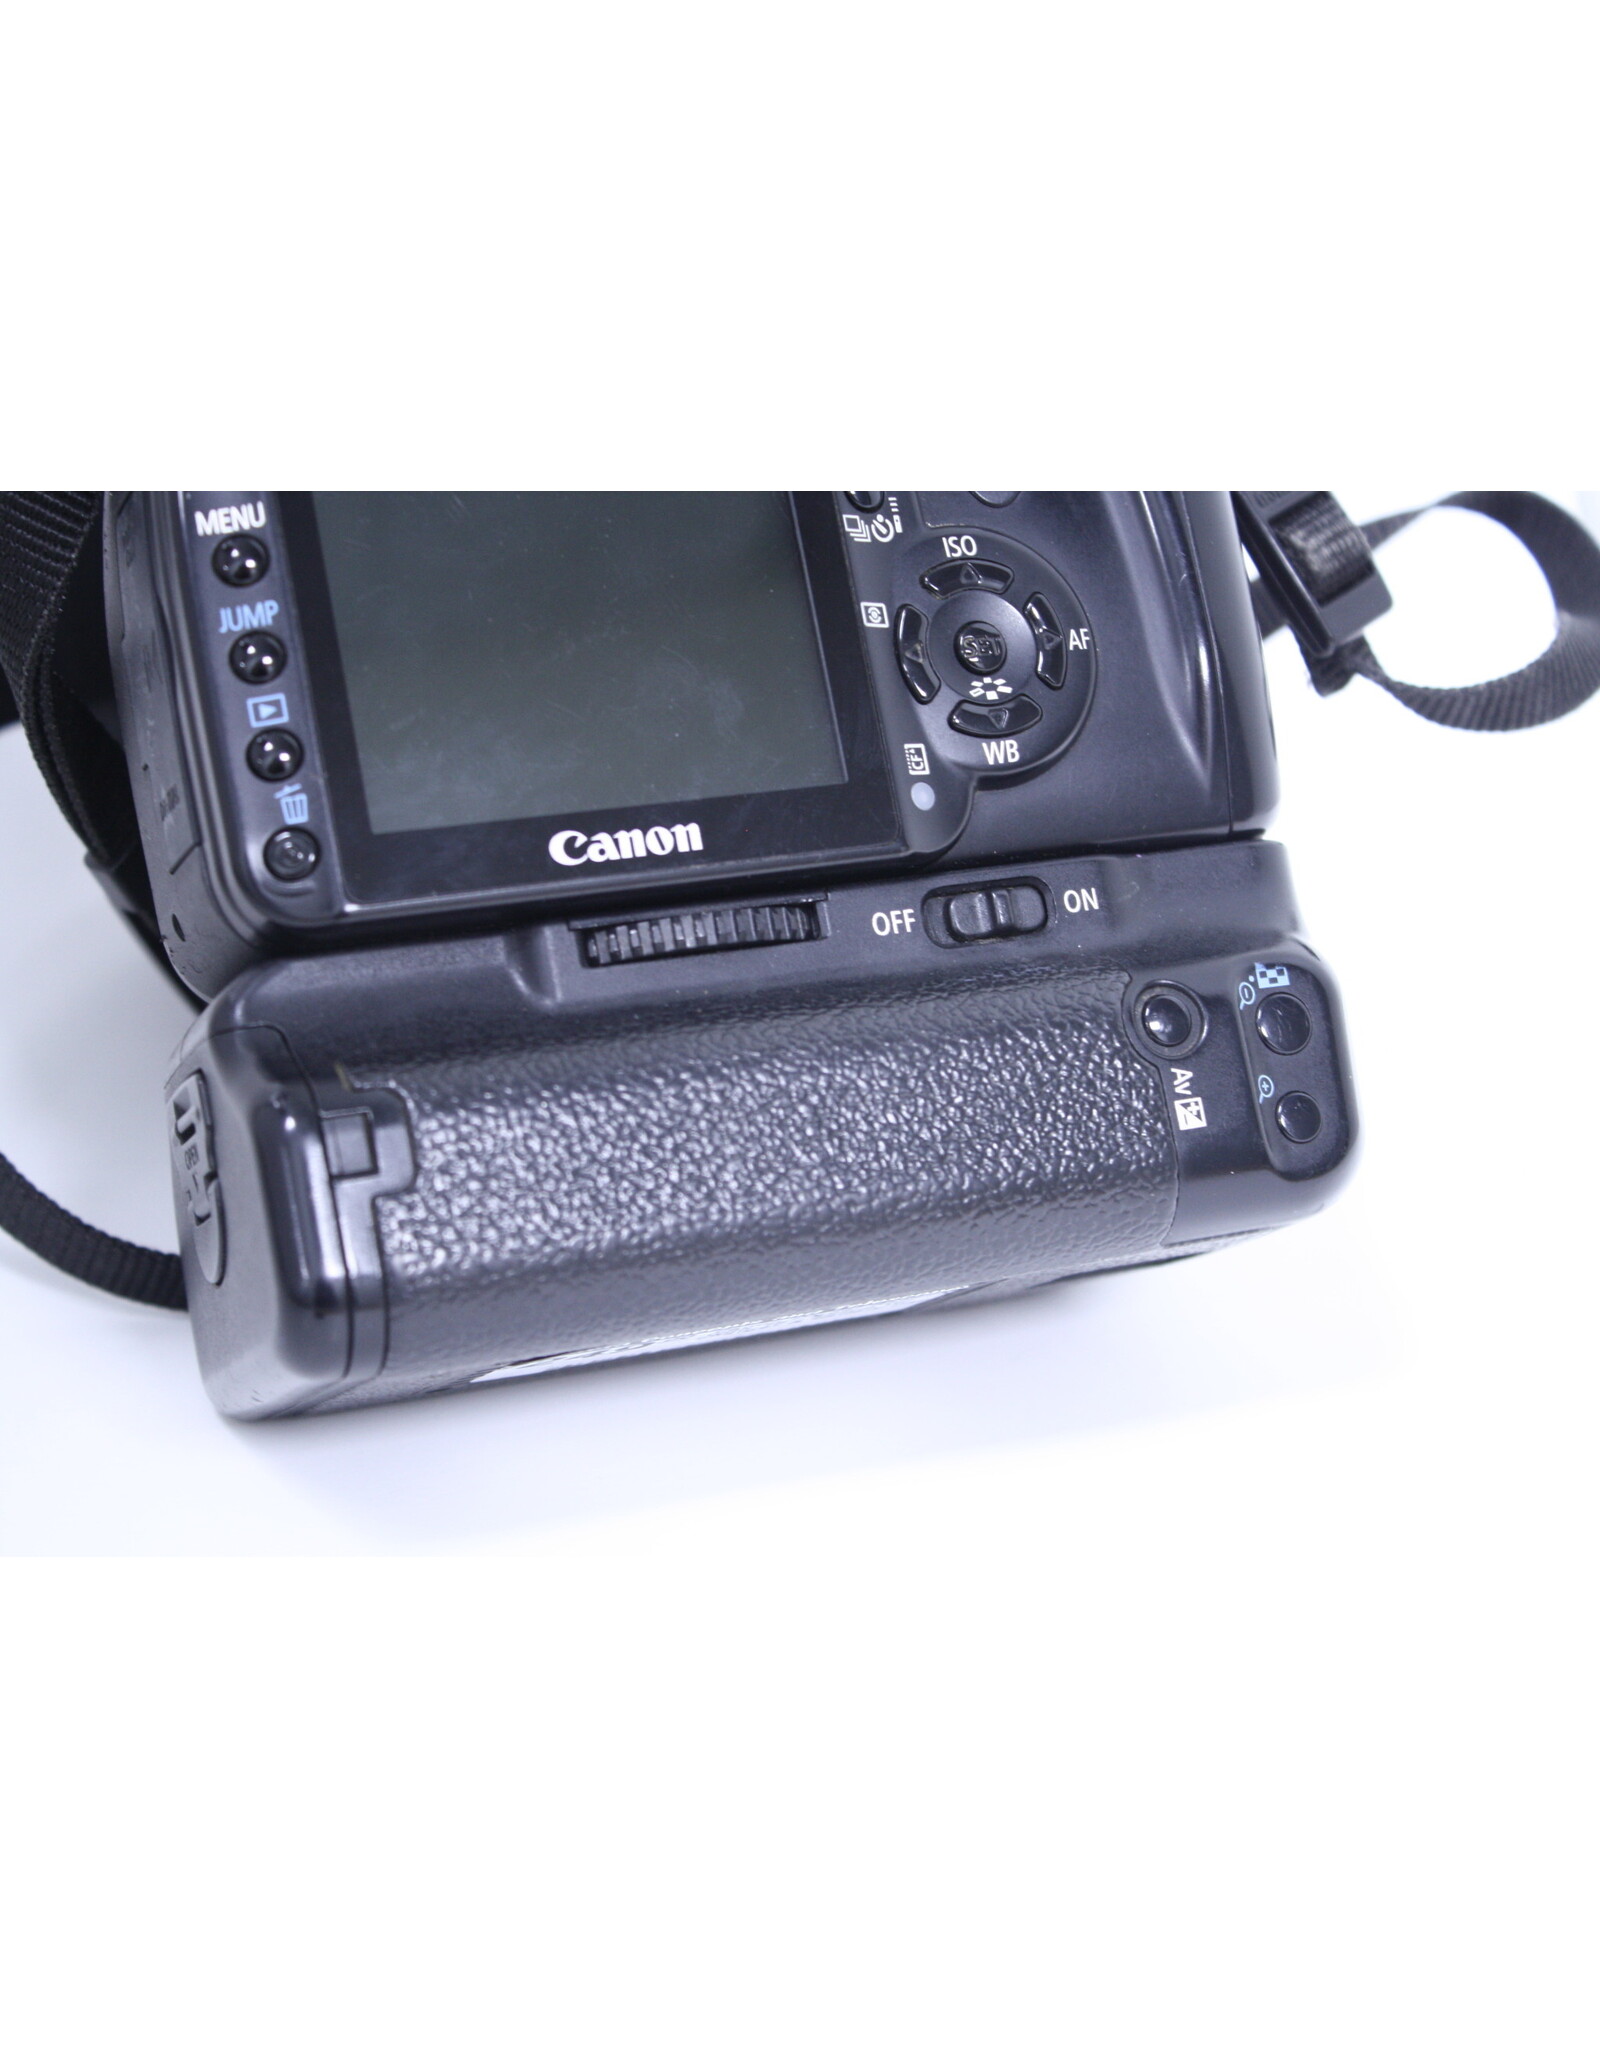 Canon Canon Digital Rebel XTi with 18-55mm w/ charger & battery pack